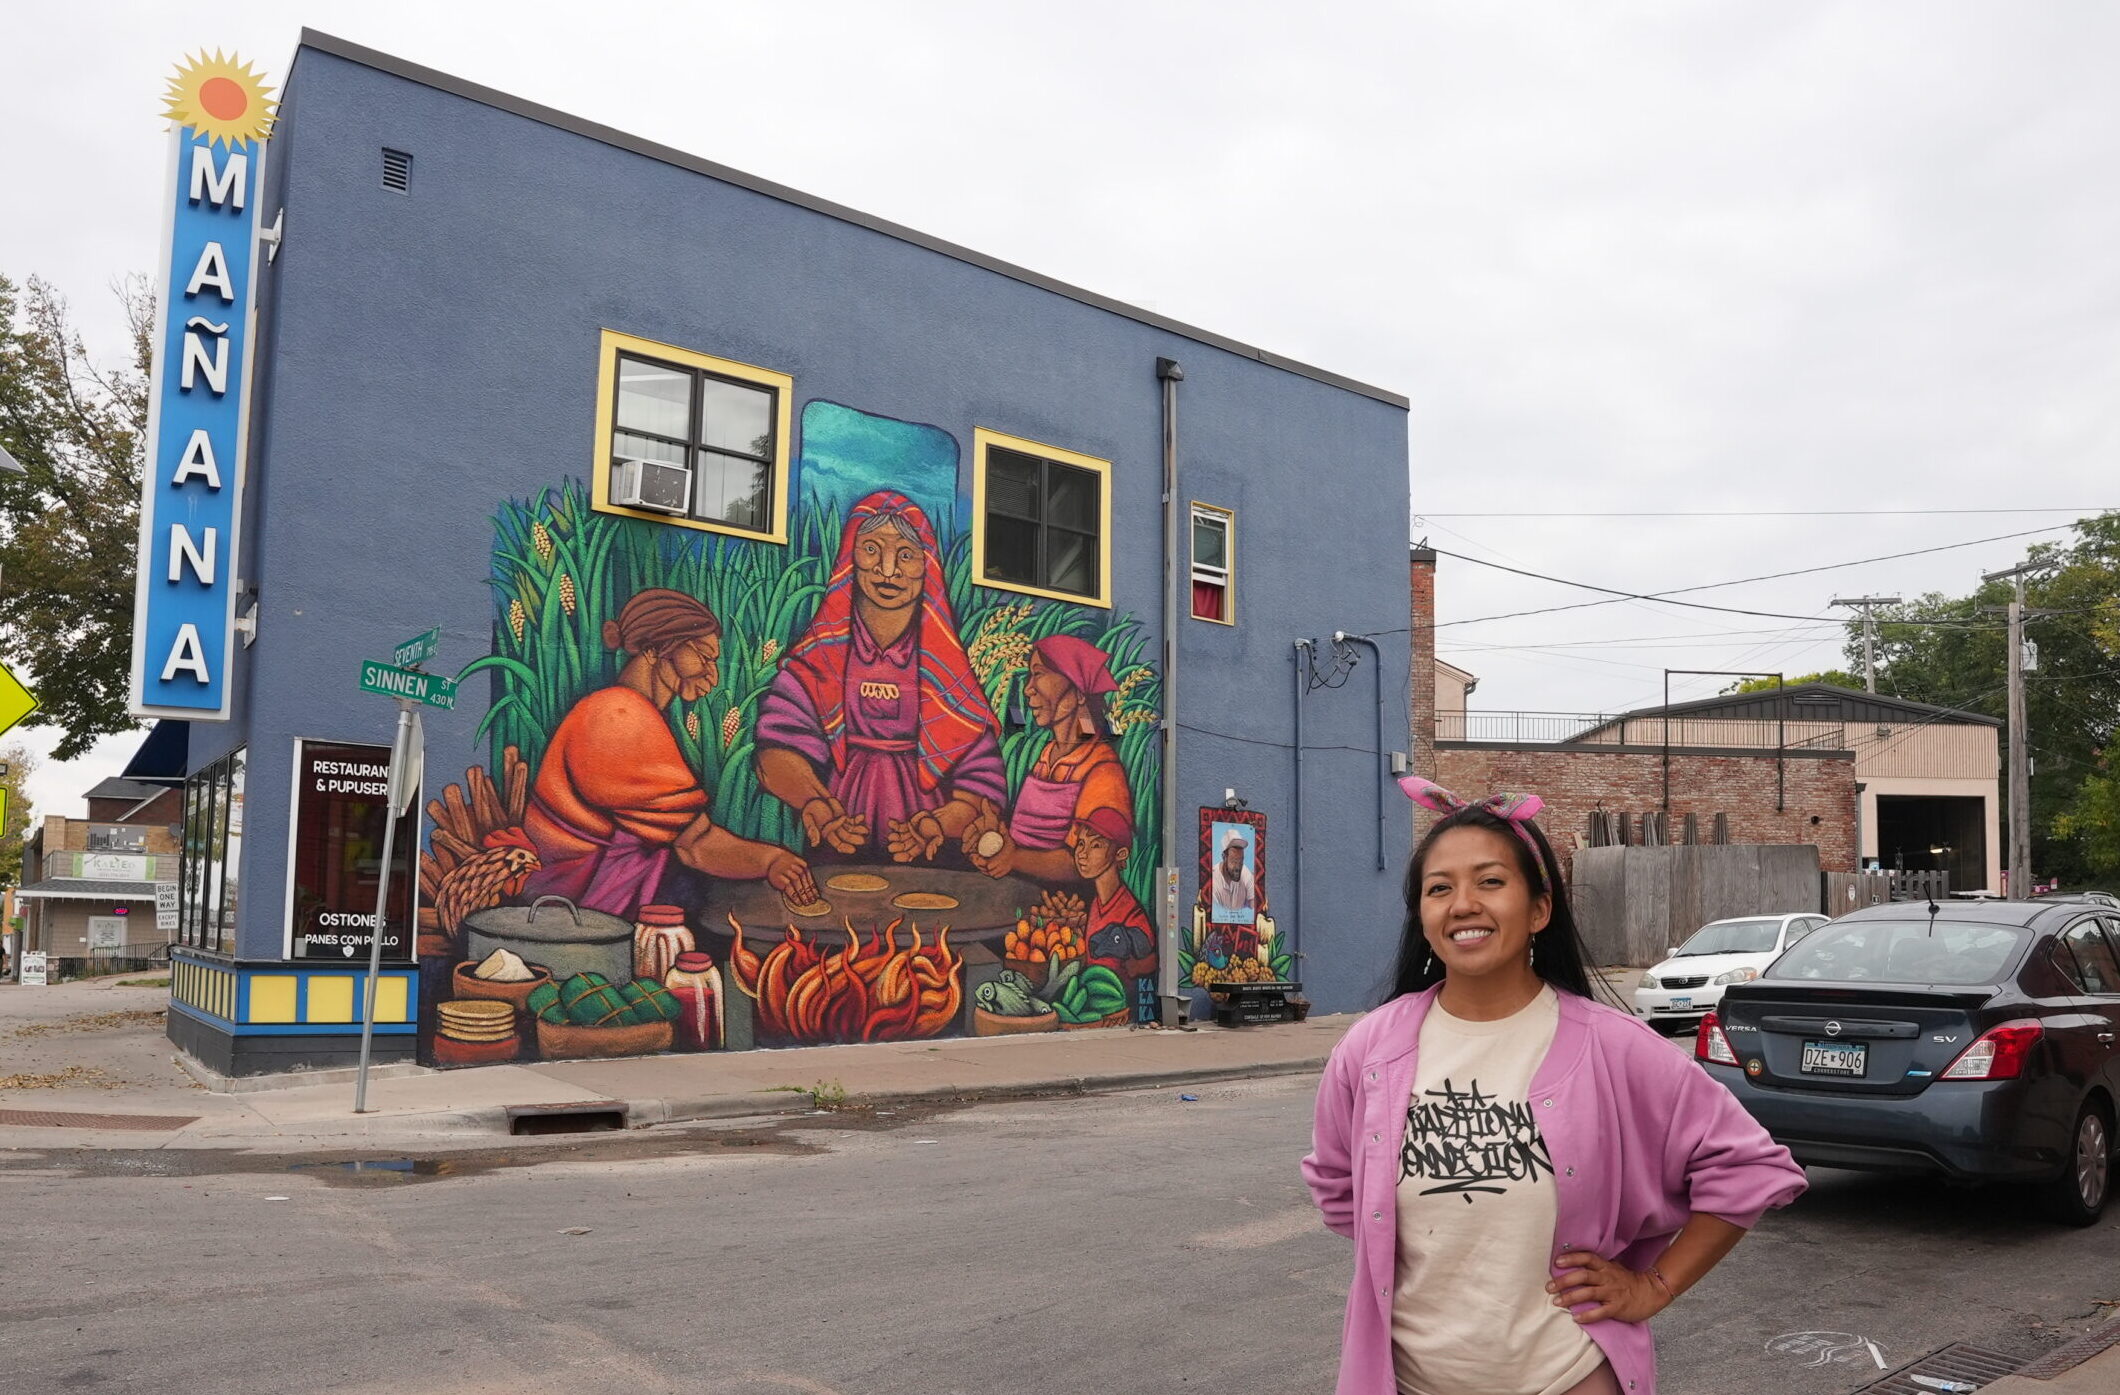 A person with a medium skin tone wearing a pink jacket stands in front of a mural of three people sitting around a hot surface rolling dough and cooking it. The mural is painted on a stucco wall of the Manana Restaurant & Pupuseria.